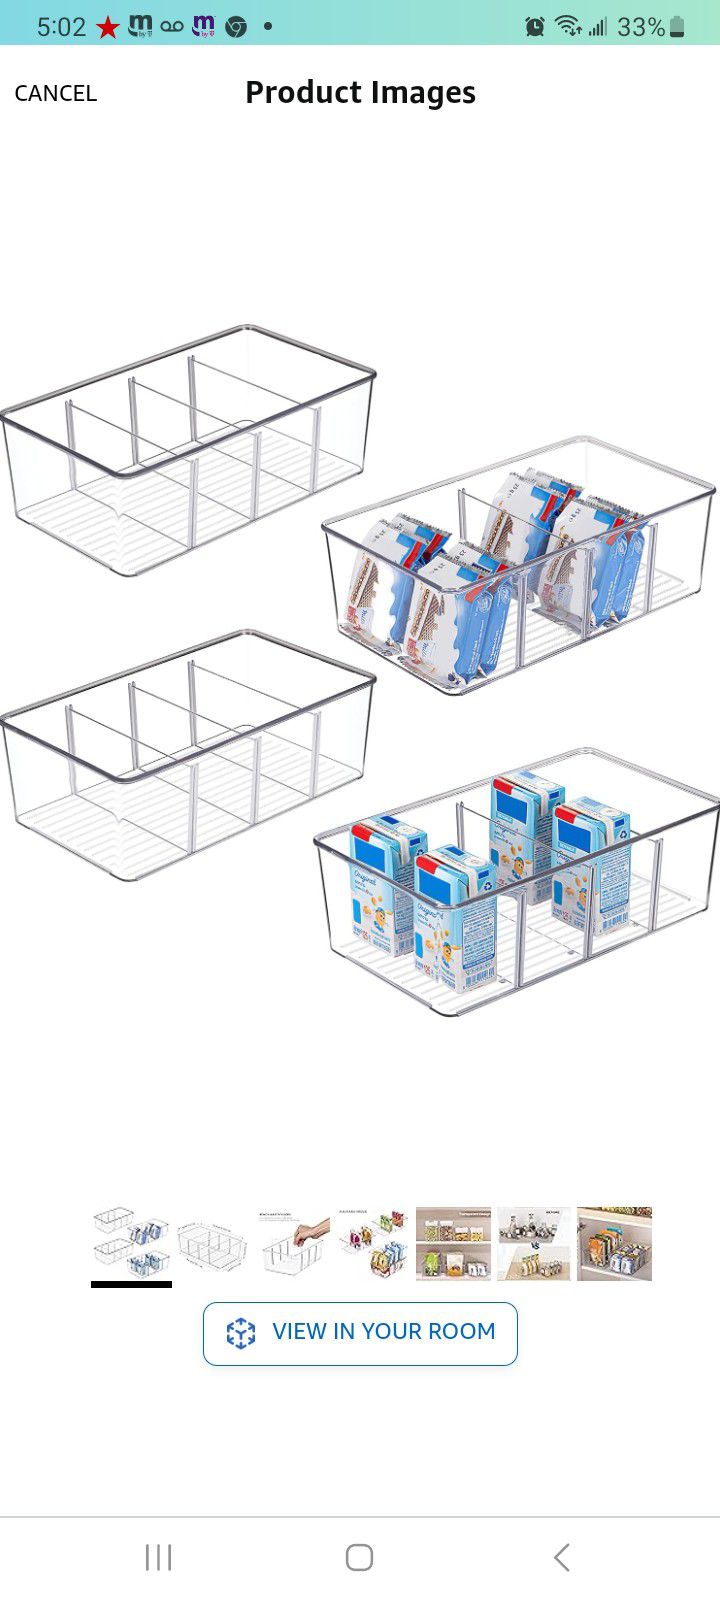 4 Pack Food Storage Organizer Bins, Clear Plastic Bins for Pantry, Kitchen, Fridge, Cabinet Organization and Storage, Compartment Holder Packets, Snac